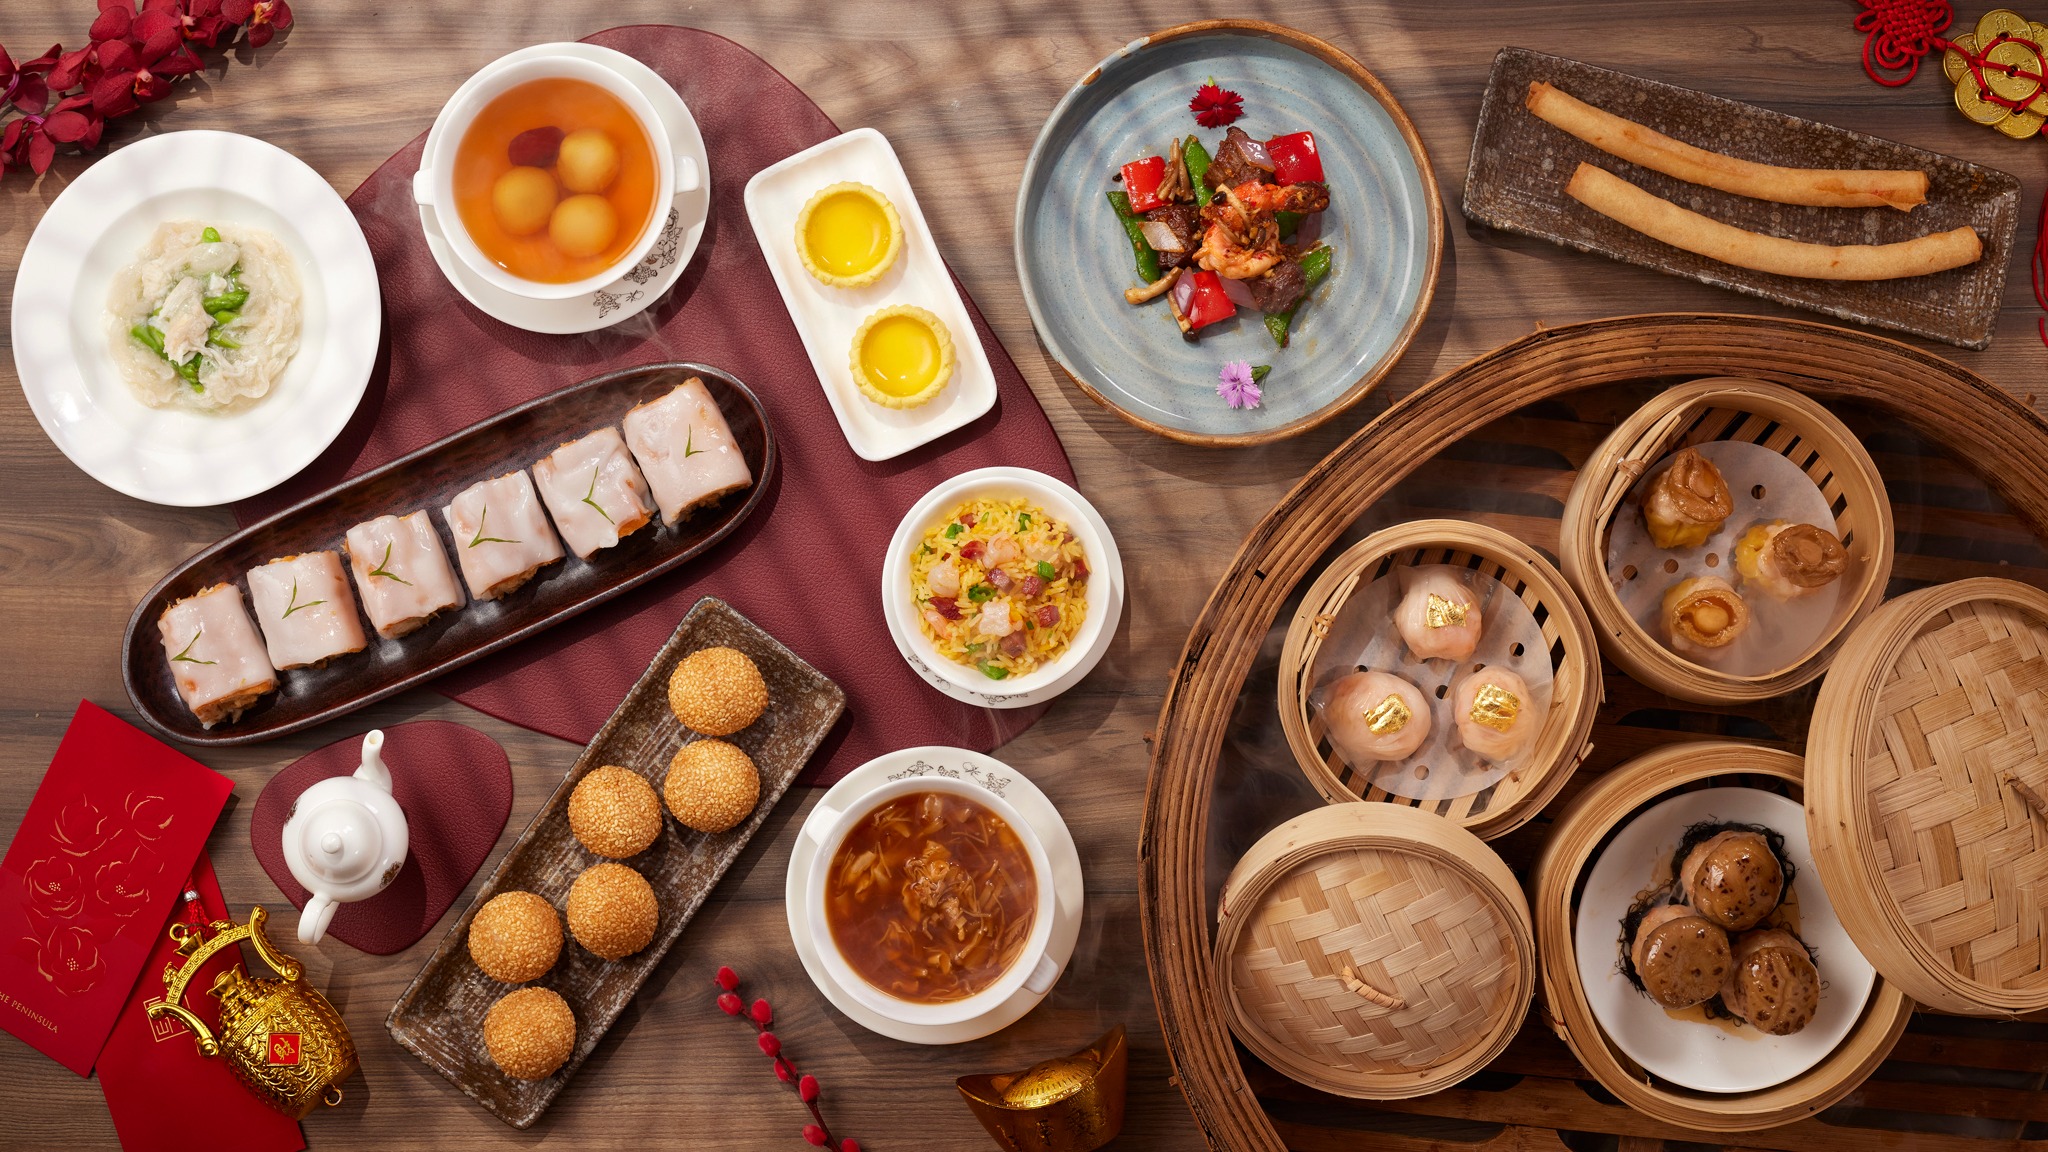 Indulge in the flavours of prosperity and happiness with our Chinese New Year dim sum set menu, meticulously handcrafted and using the finest ingredients to elevate your Lunar New Year celebrations.